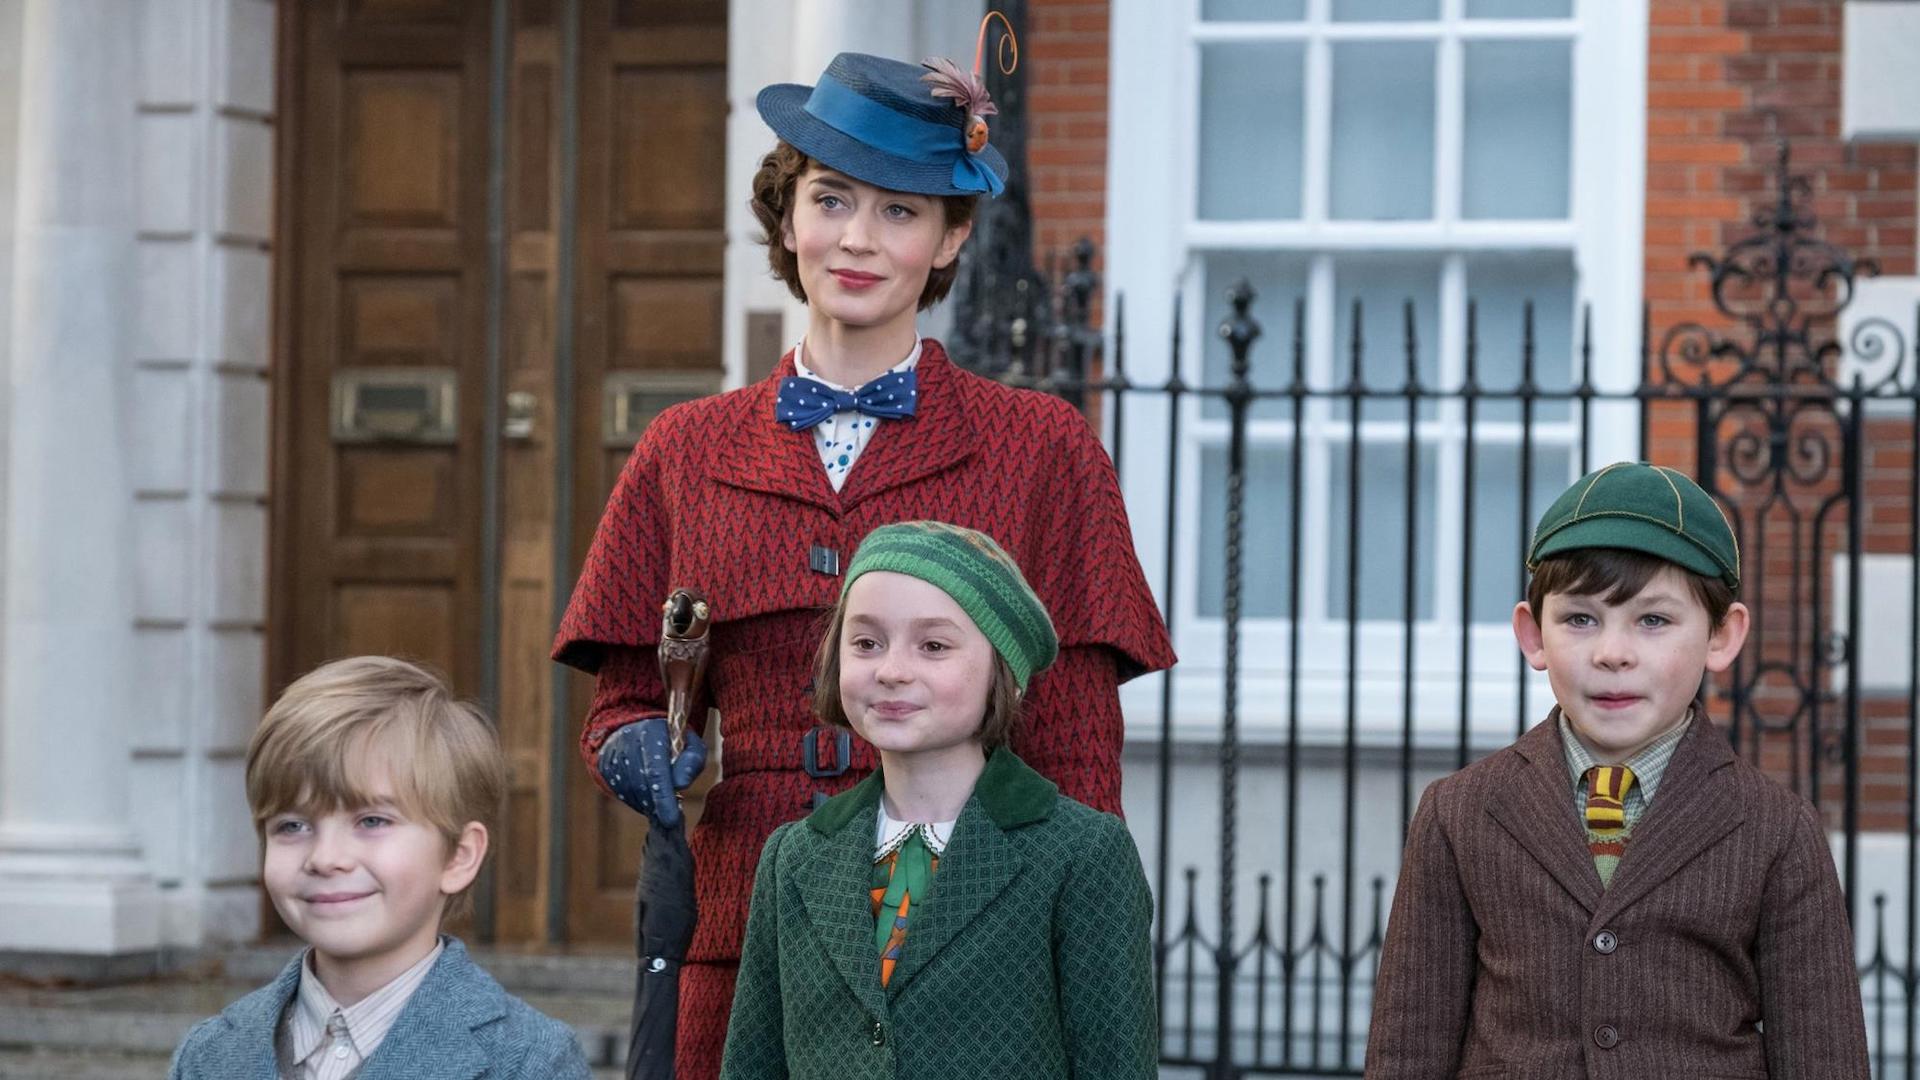 A scene from Mary Poppins Returns featuring Mary Poppins and the Banks children